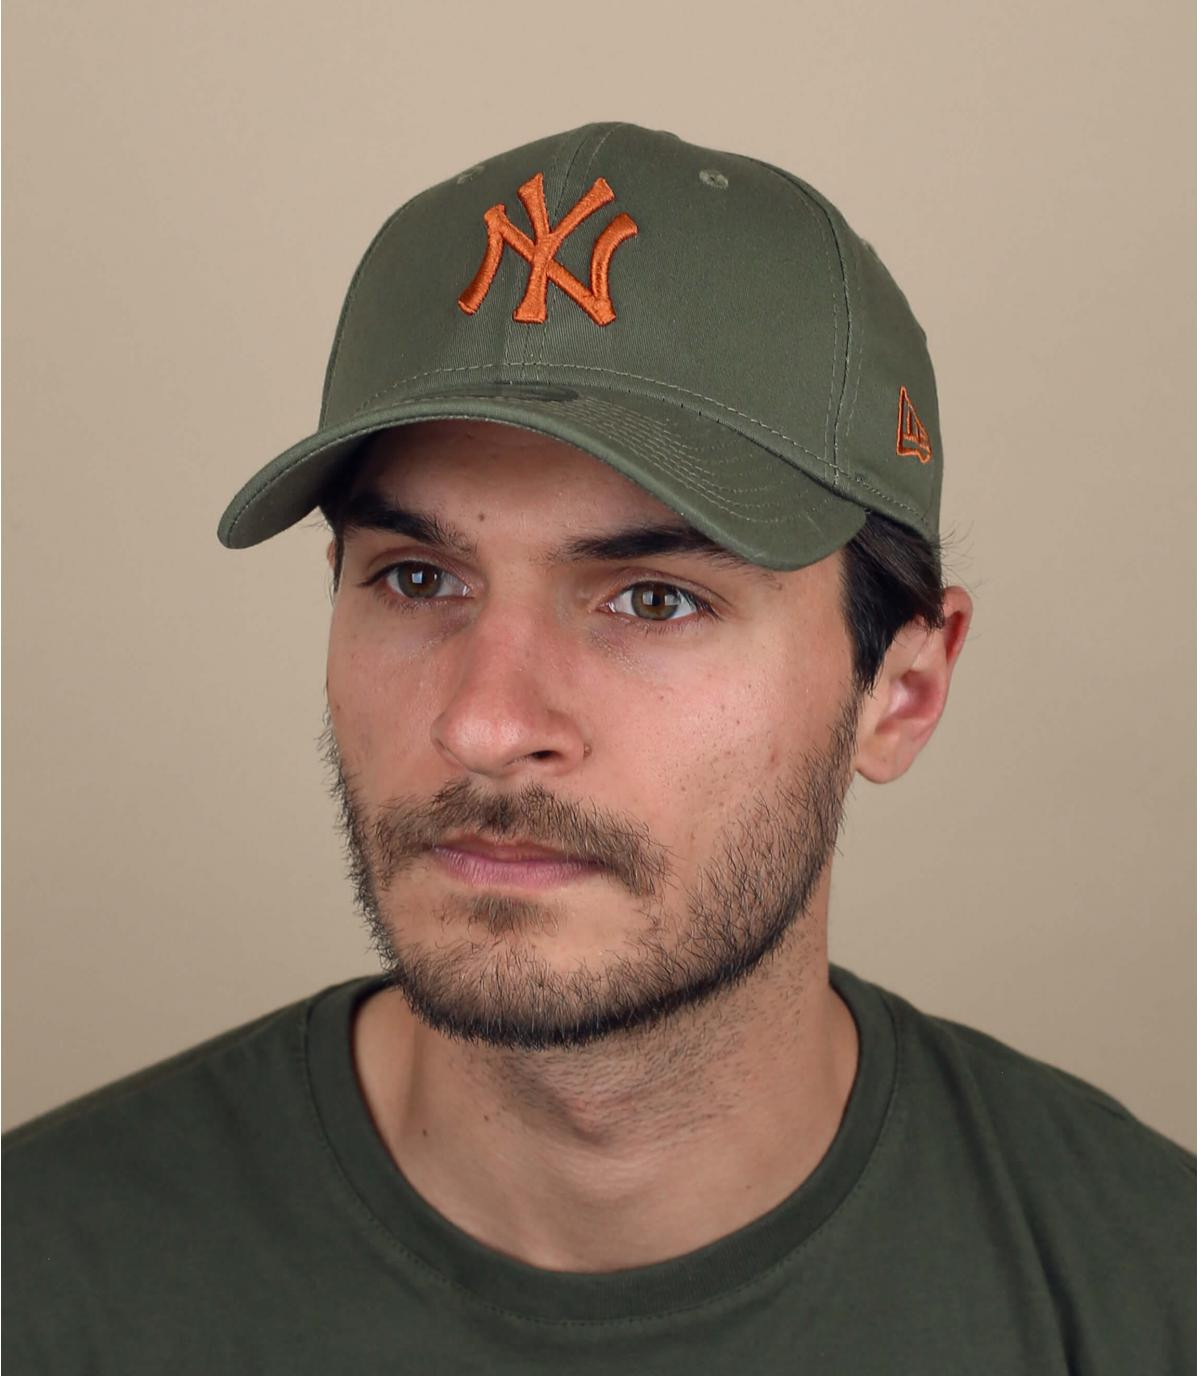  Casquette League Ess NY 3930 olive toffee